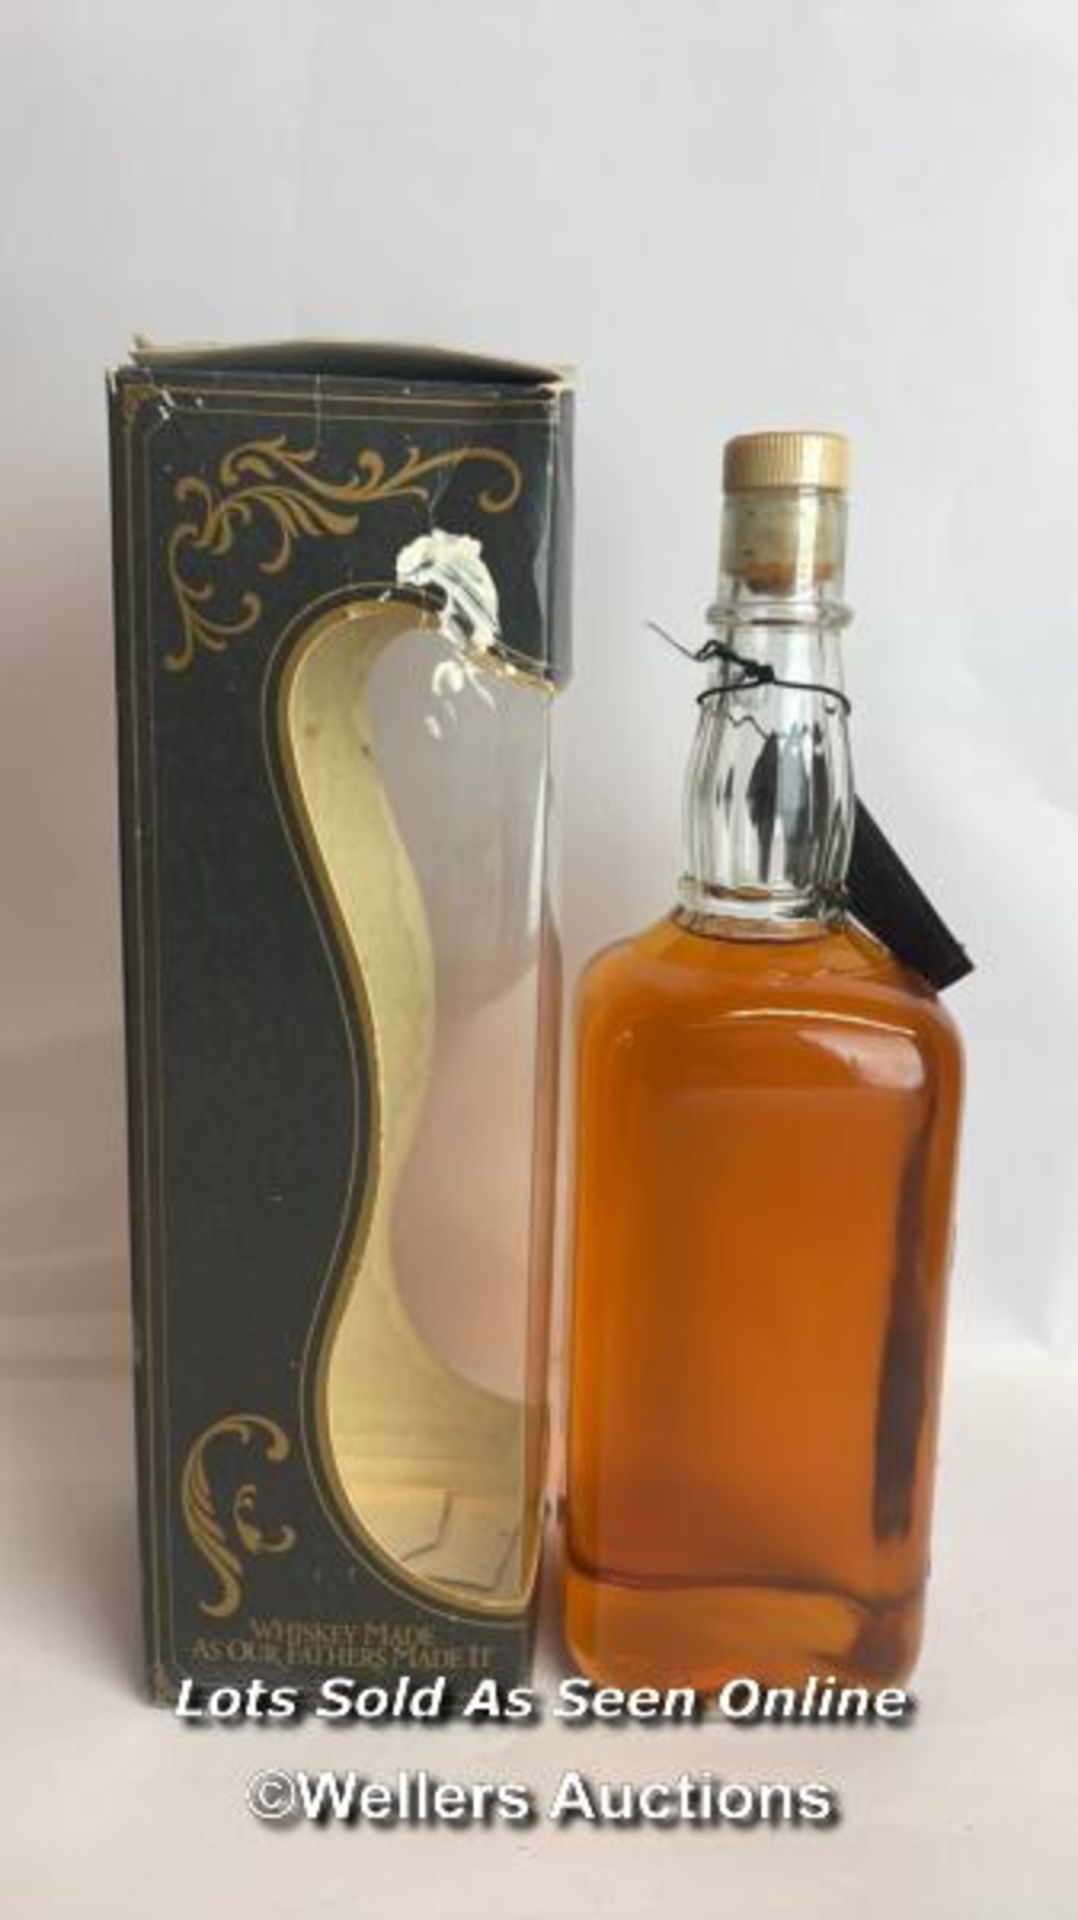 1895 Jack Daniels Replica Bottle, Old No.7 Brand, Old Time Tennessee Whiskey, 1L, 43% vol / Please - Image 2 of 7